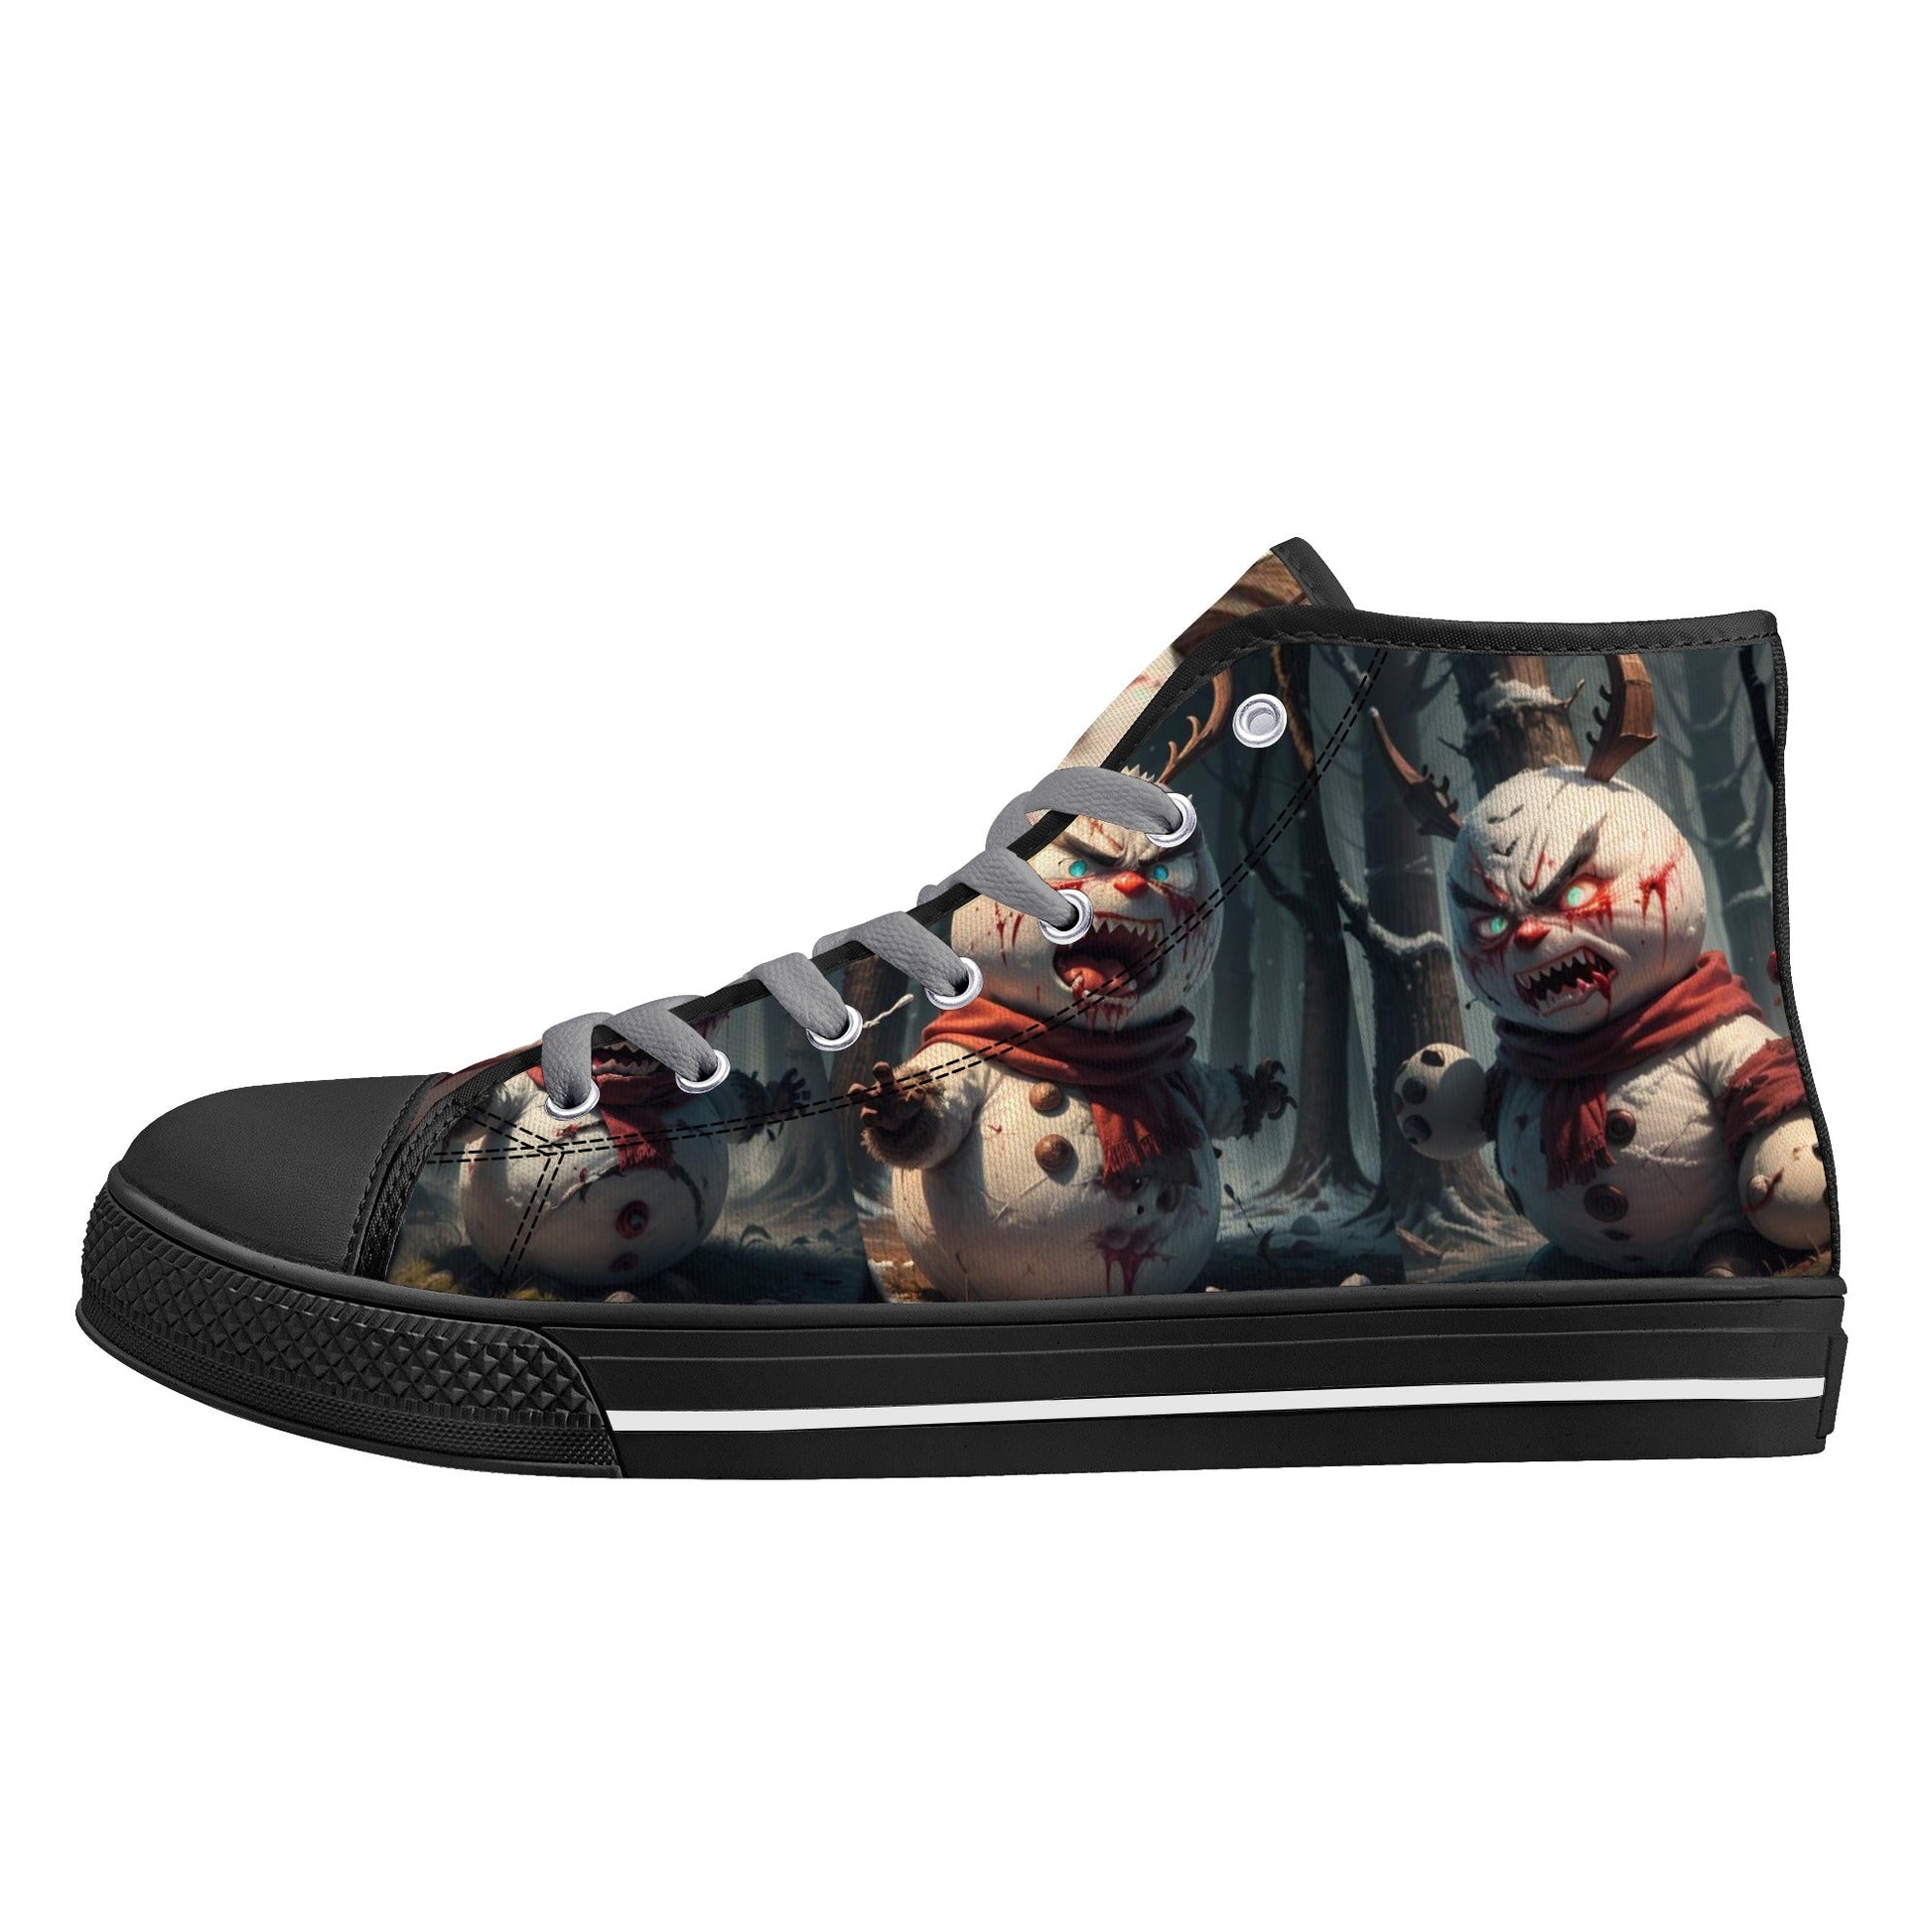 Stand out  with the  Frostys revenge Mens High Top Canvas Shoes  available at Hey Nugget. Grab yours today!